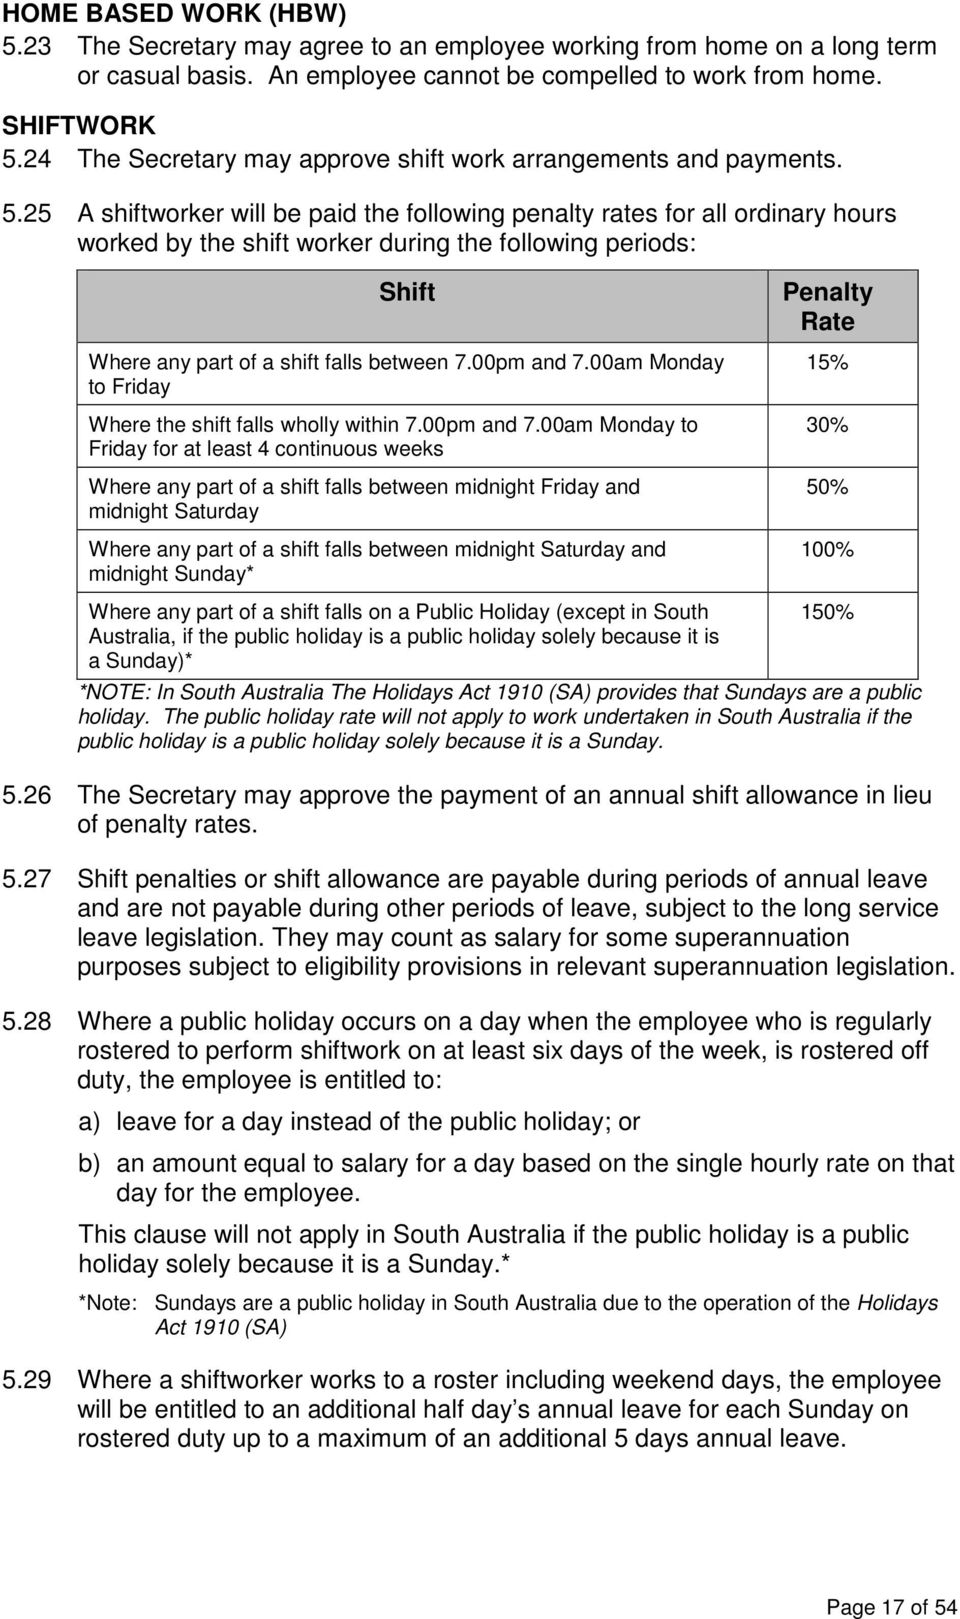 25 A shiftworker will be paid the following penalty rates for all ordinary hours worked by the shift worker during the following periods: Shift Where any part of a shift falls between 7.00pm and 7.